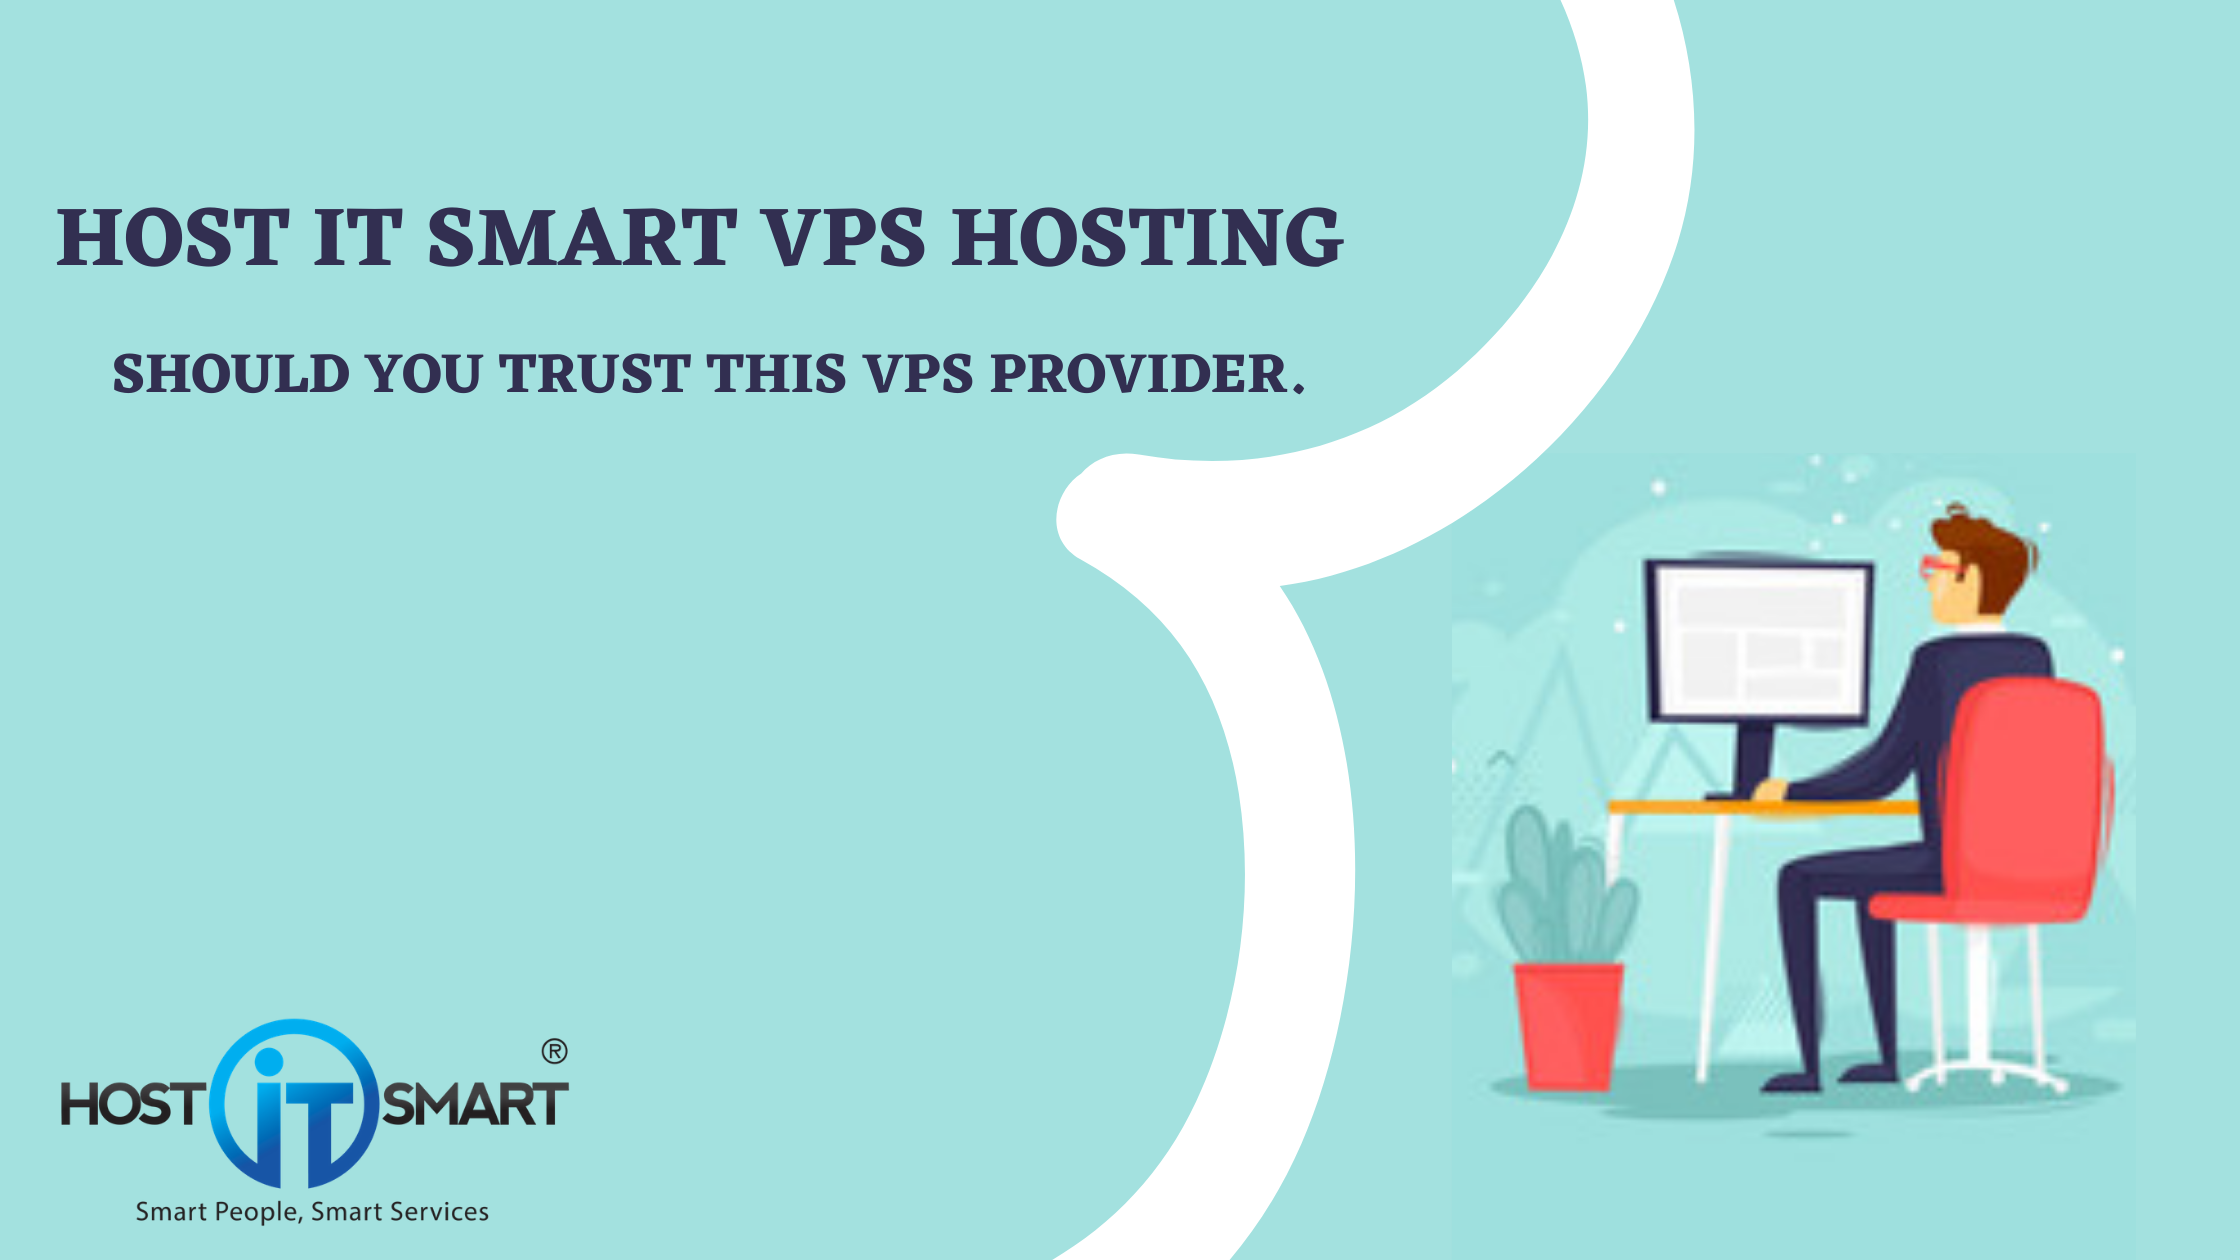 Host IT Smart Review: Should you trust this VPS hosting provider